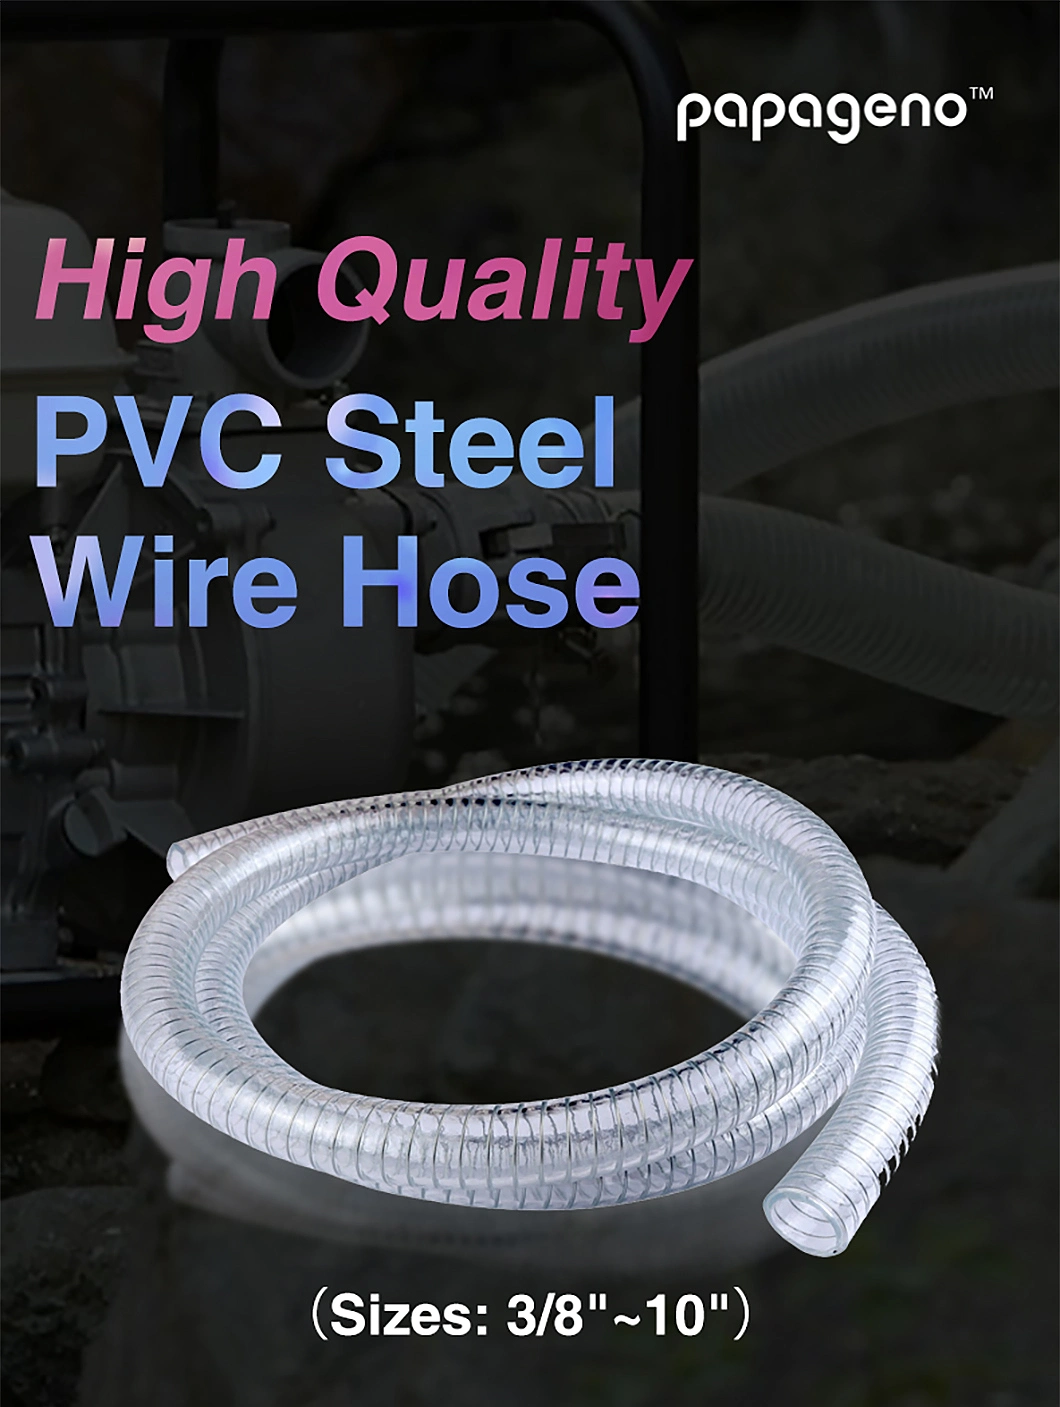 Air Hose Rubber Oil Abrasion Resistant PVC Steel Wire Braided Quality Pipe